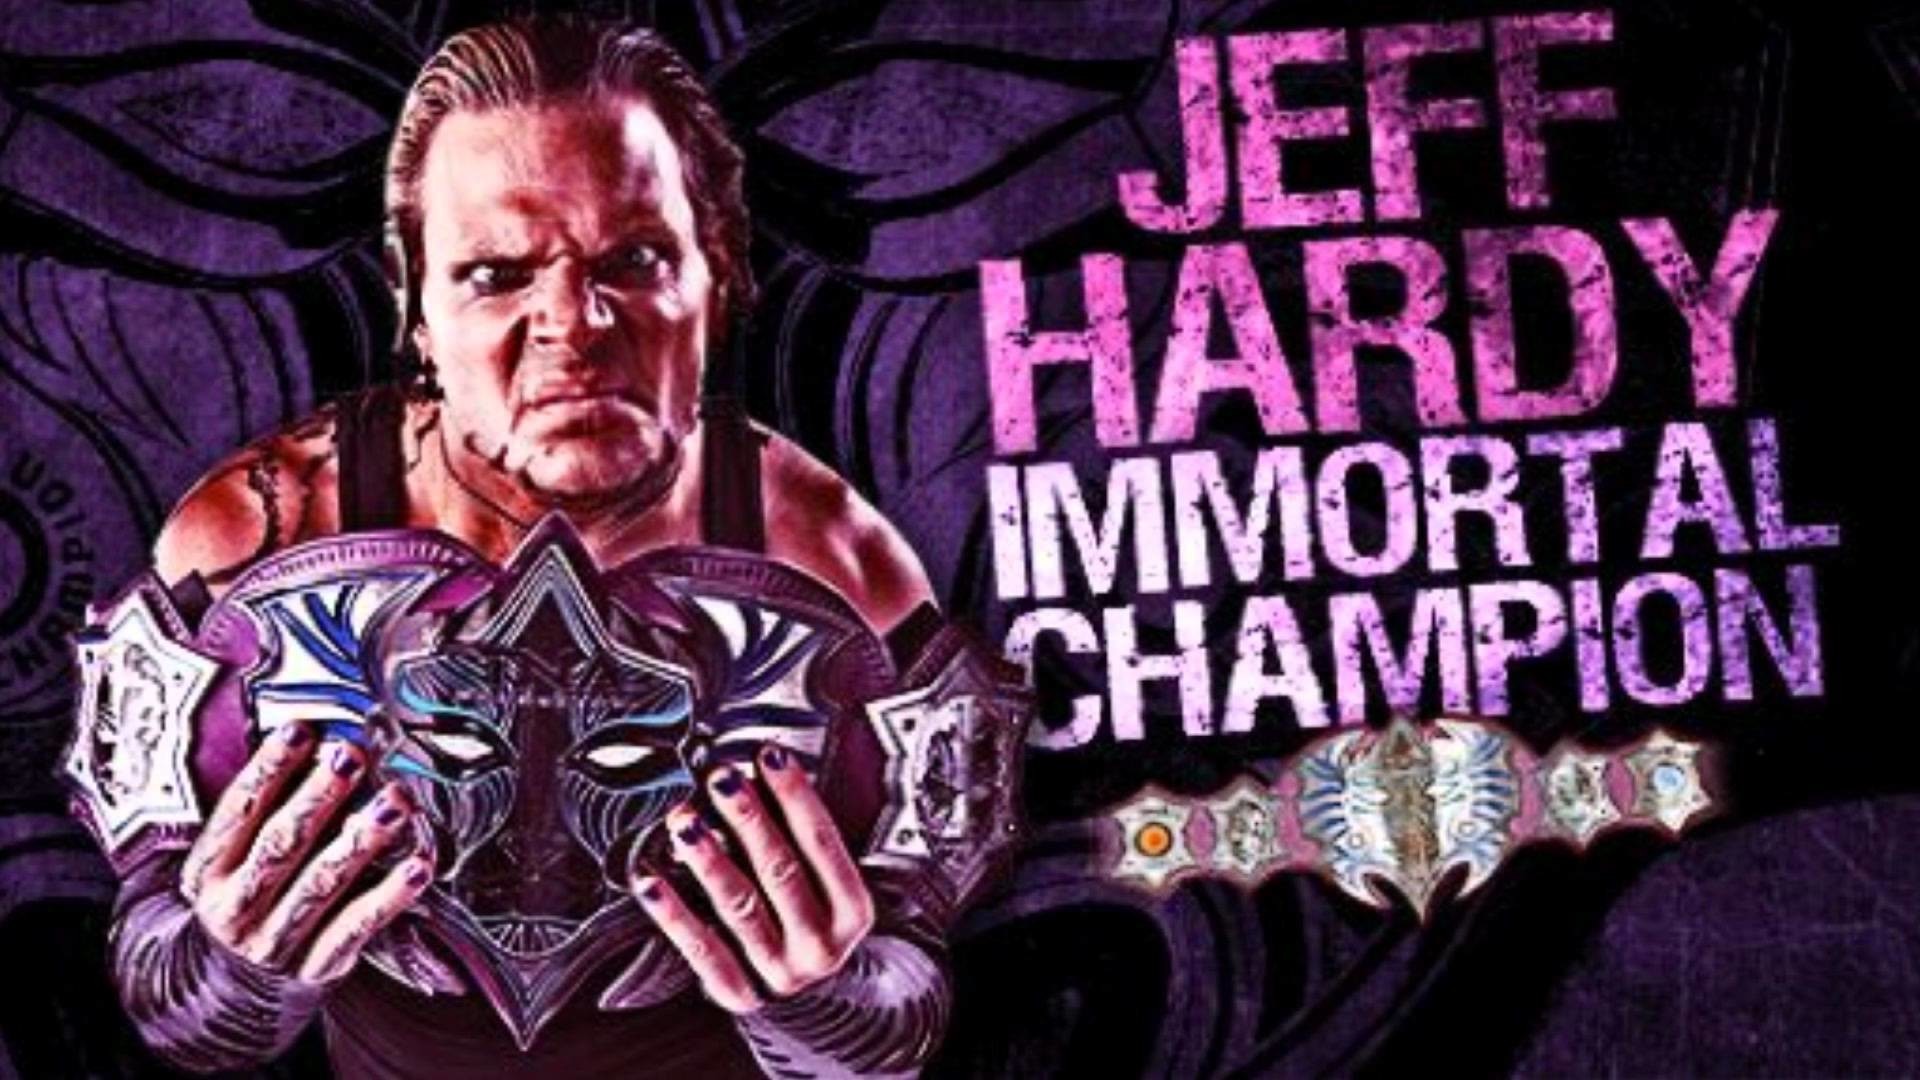 1920x1080 My Jeff Hardy Wallpaper Collection - YouTube